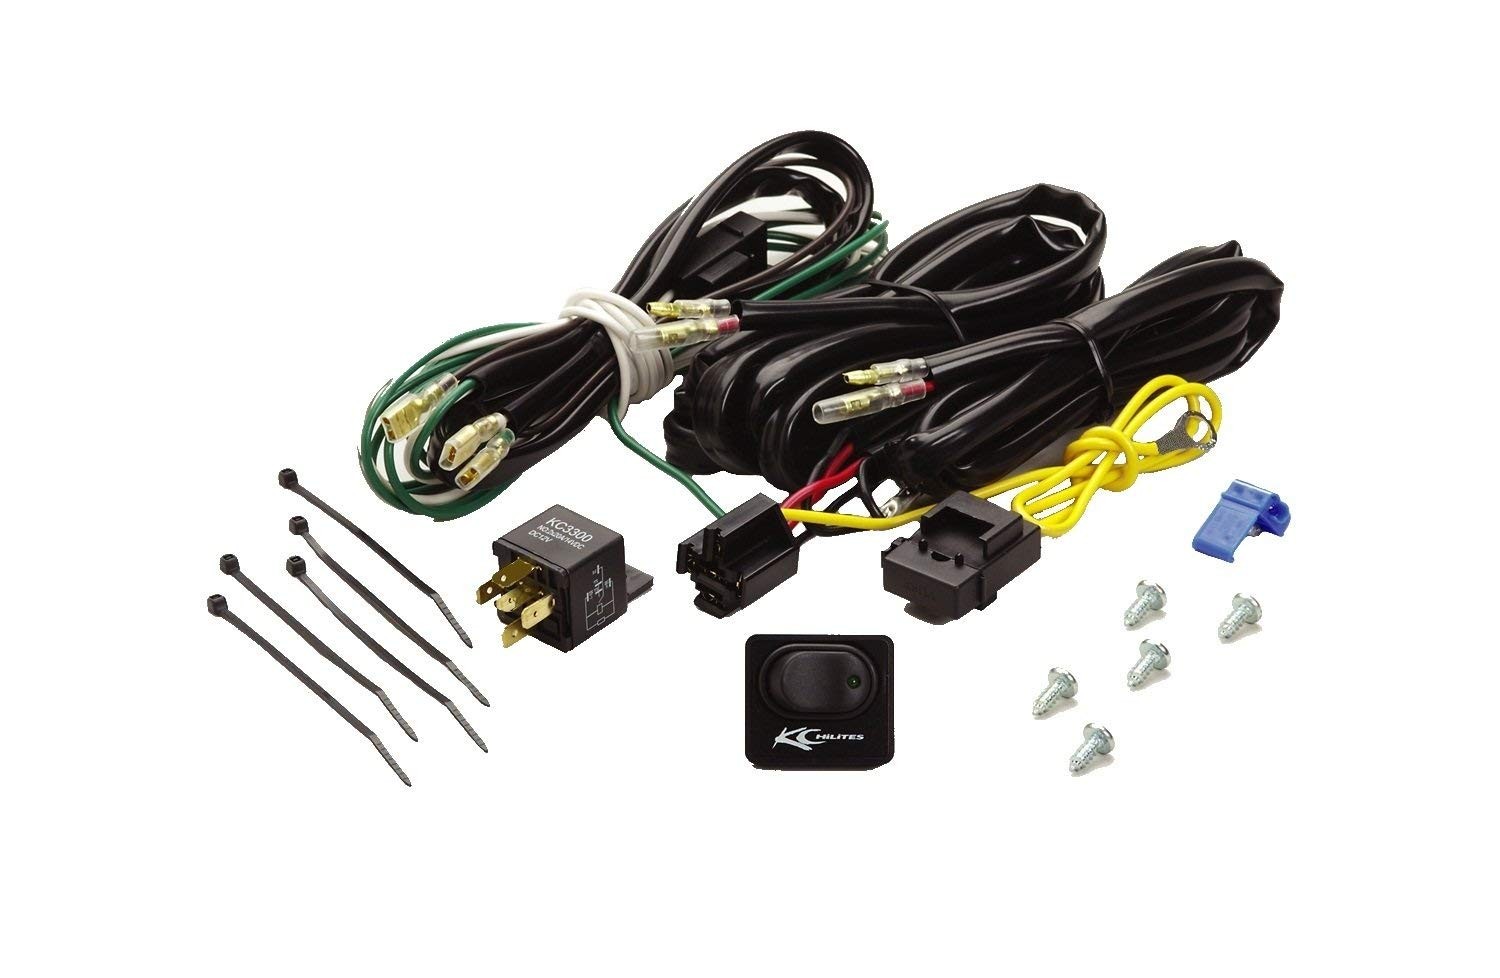 Amazon KC HiLiTES 6315 Wiring Harness with 40 Amp Relay and LED Rocker Switch Automotive